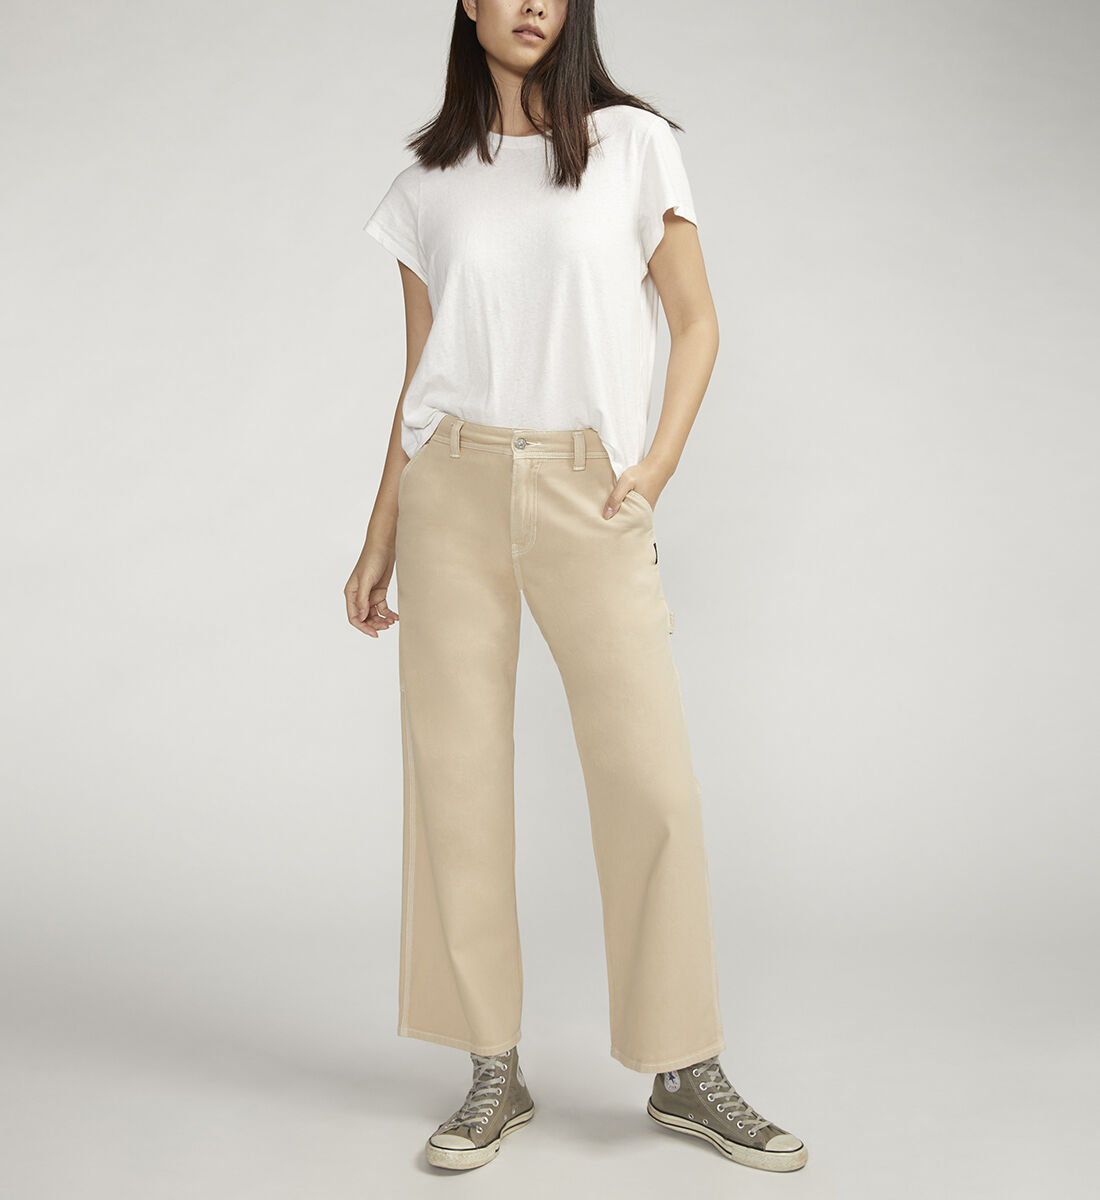 Buy Relaxed Fit Straight Leg Carpenter Pant for USD 46.80 | Silver 